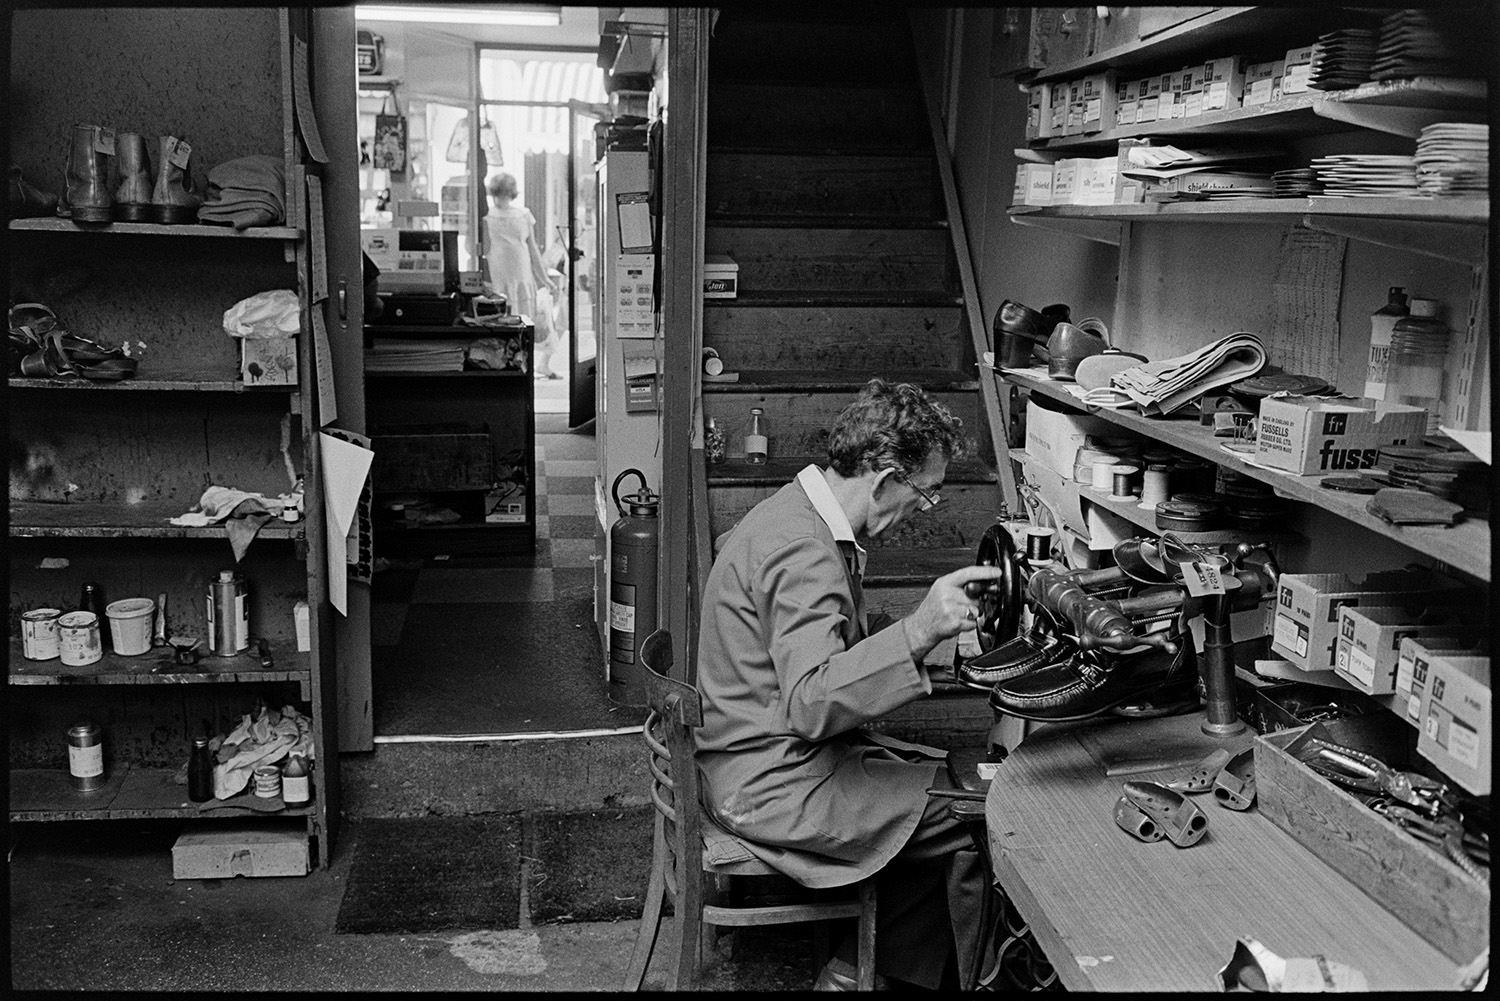 Cobbler mending shoes, interior of workshop, shoe displays. Customers collecting repairs. 
[A man mending shows in his cobbler's workshop in Mill Street, Bideford. He is using a Singer sewing machine. Shelves with various items are visible and the shop front can be seen through an open doorway.]